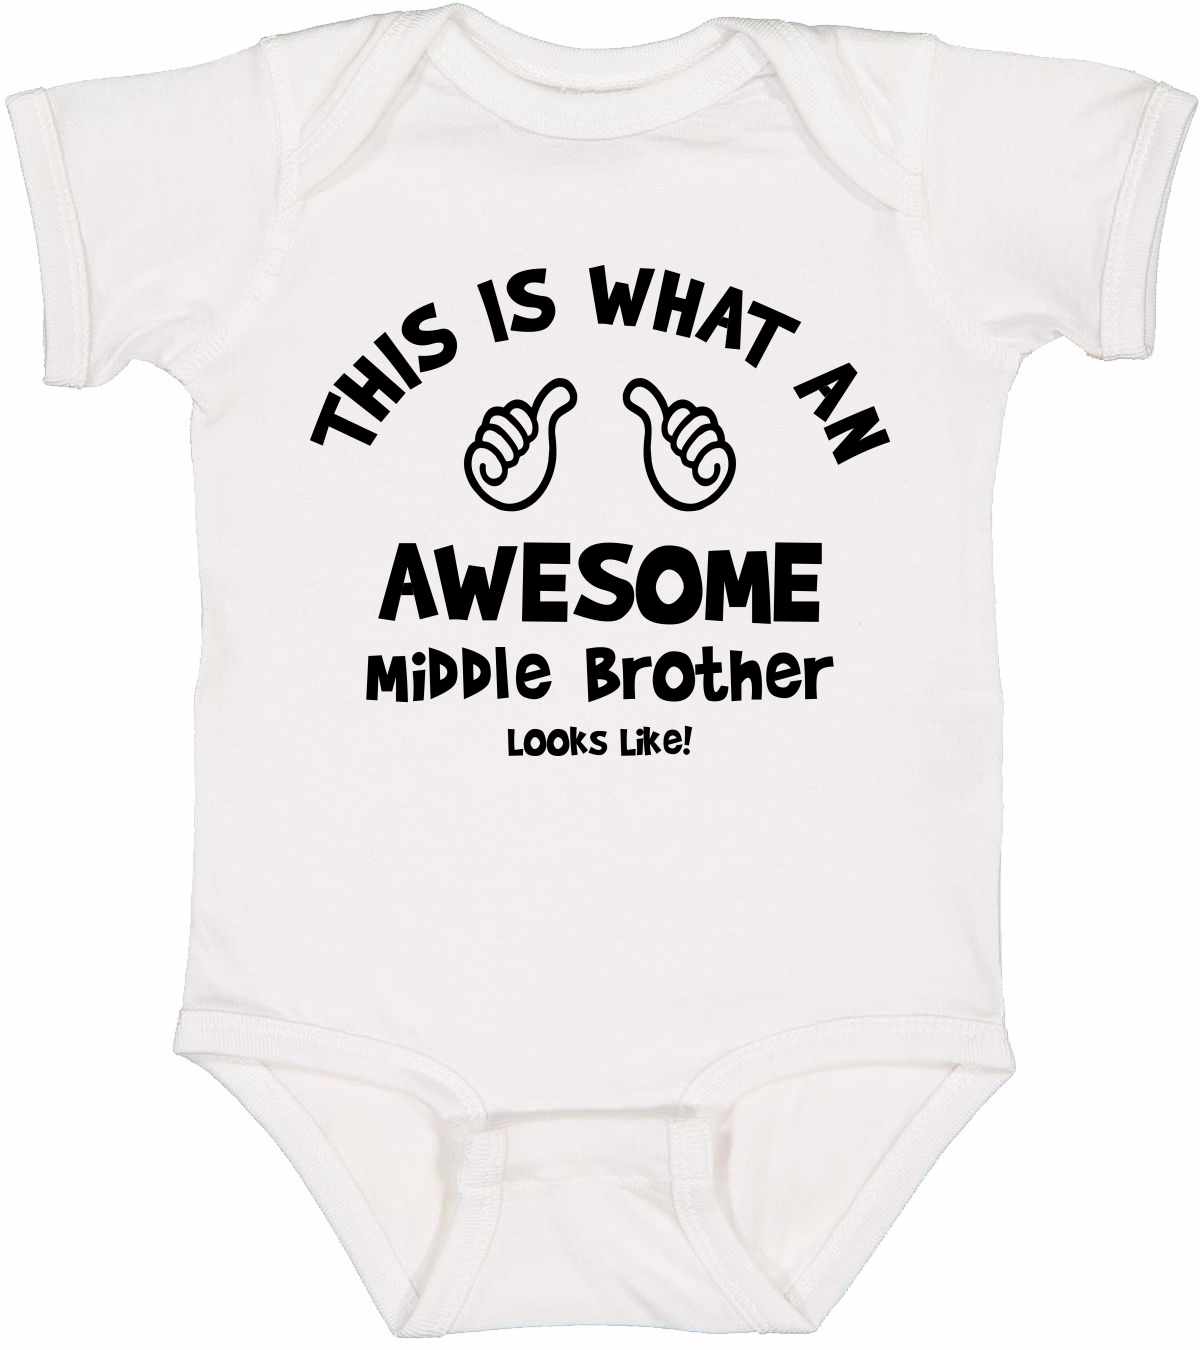 This Is What An Awesome Middle Brother Looks Like on Infant BodySuit (#1094-10)